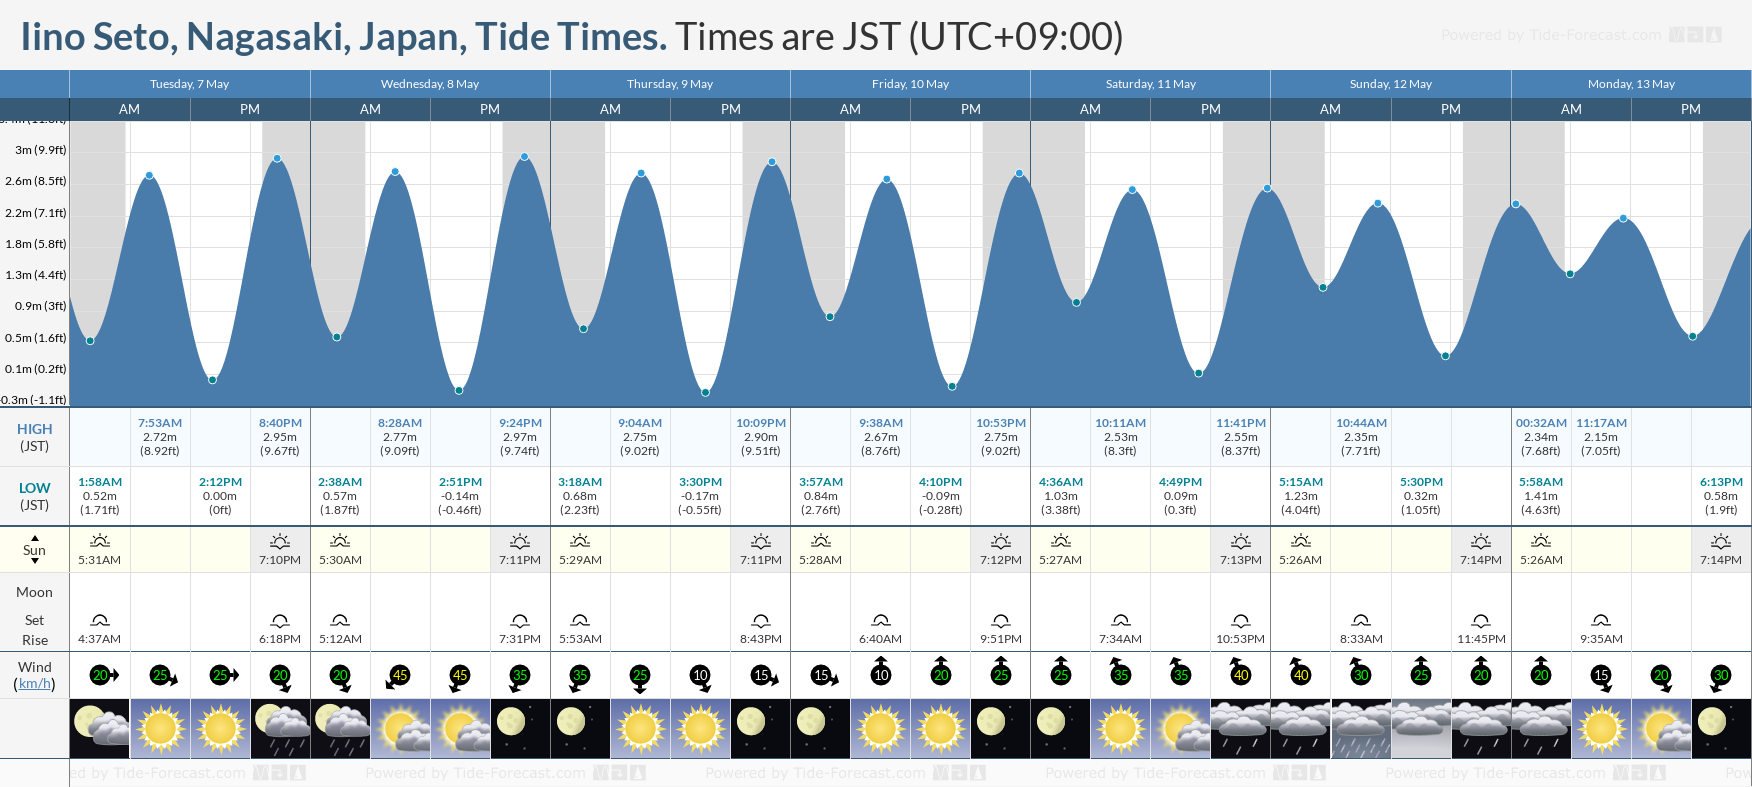 Iino Seto, Nagasaki, Japan Tide Chart including high and low tide times for the next 7 days